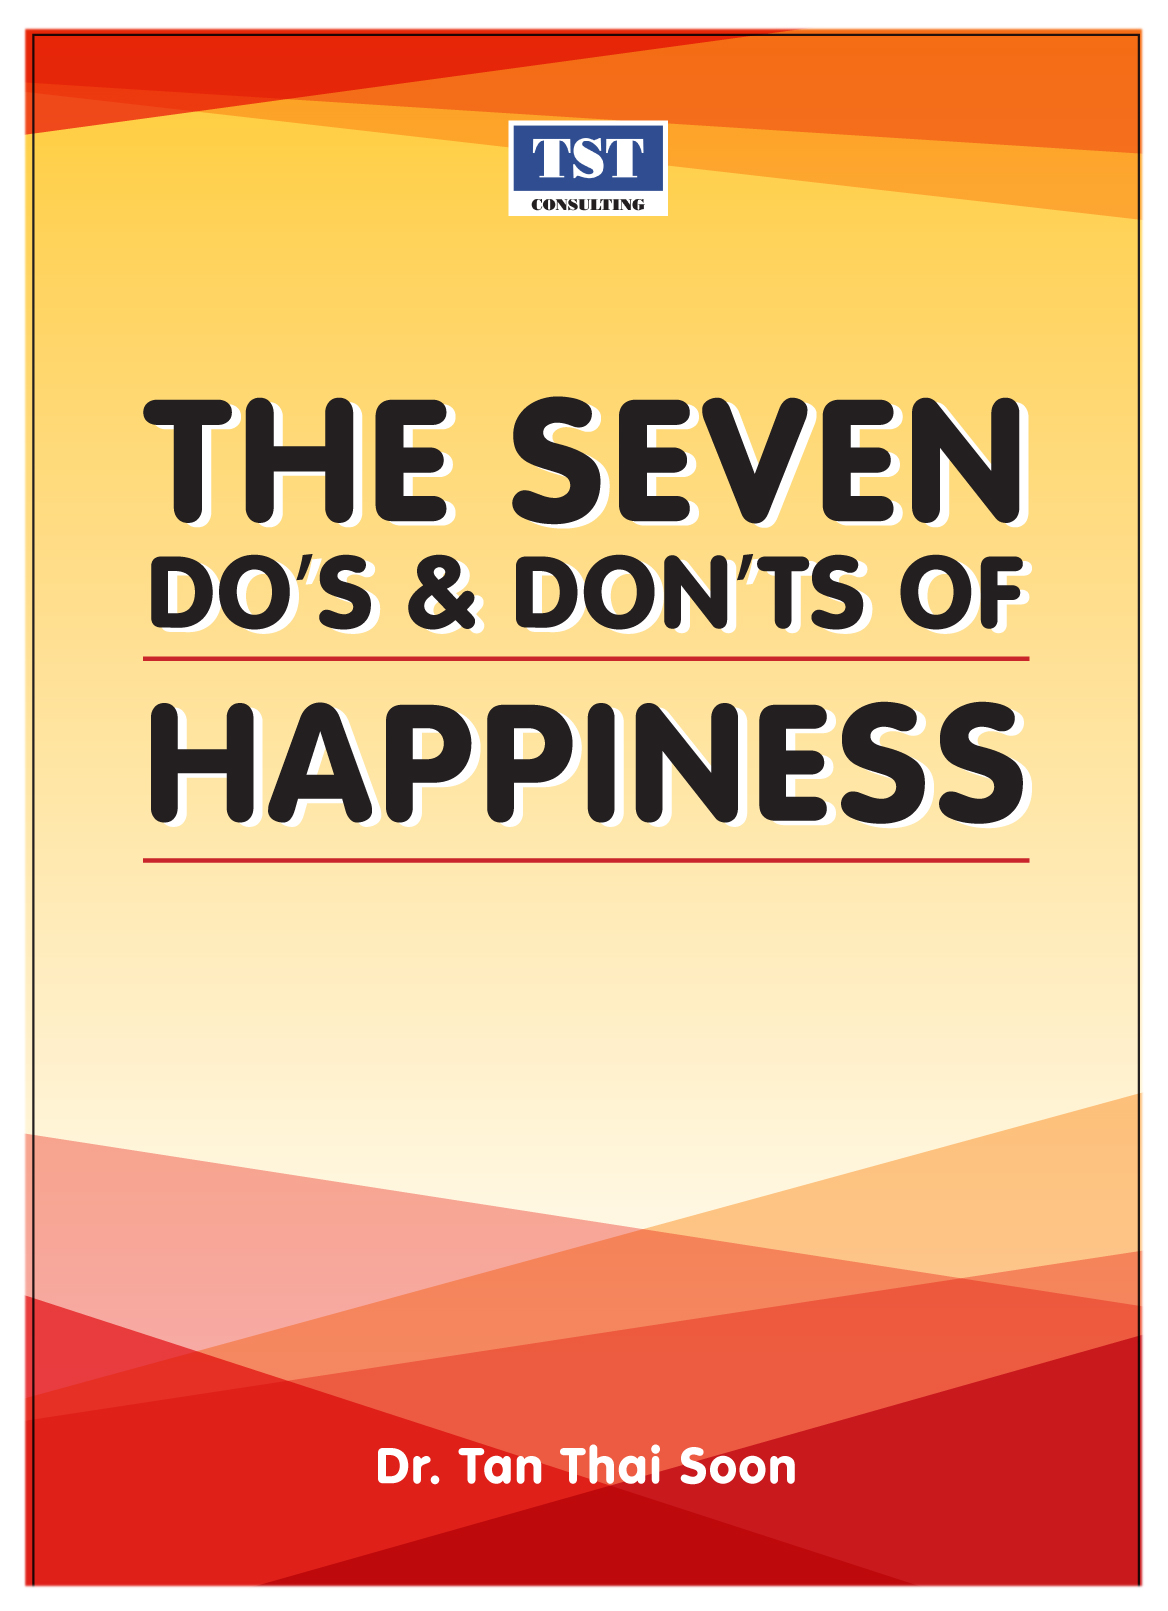 Course Image   The Seven Do’s and Don’ts of Happiness (Free eBook)